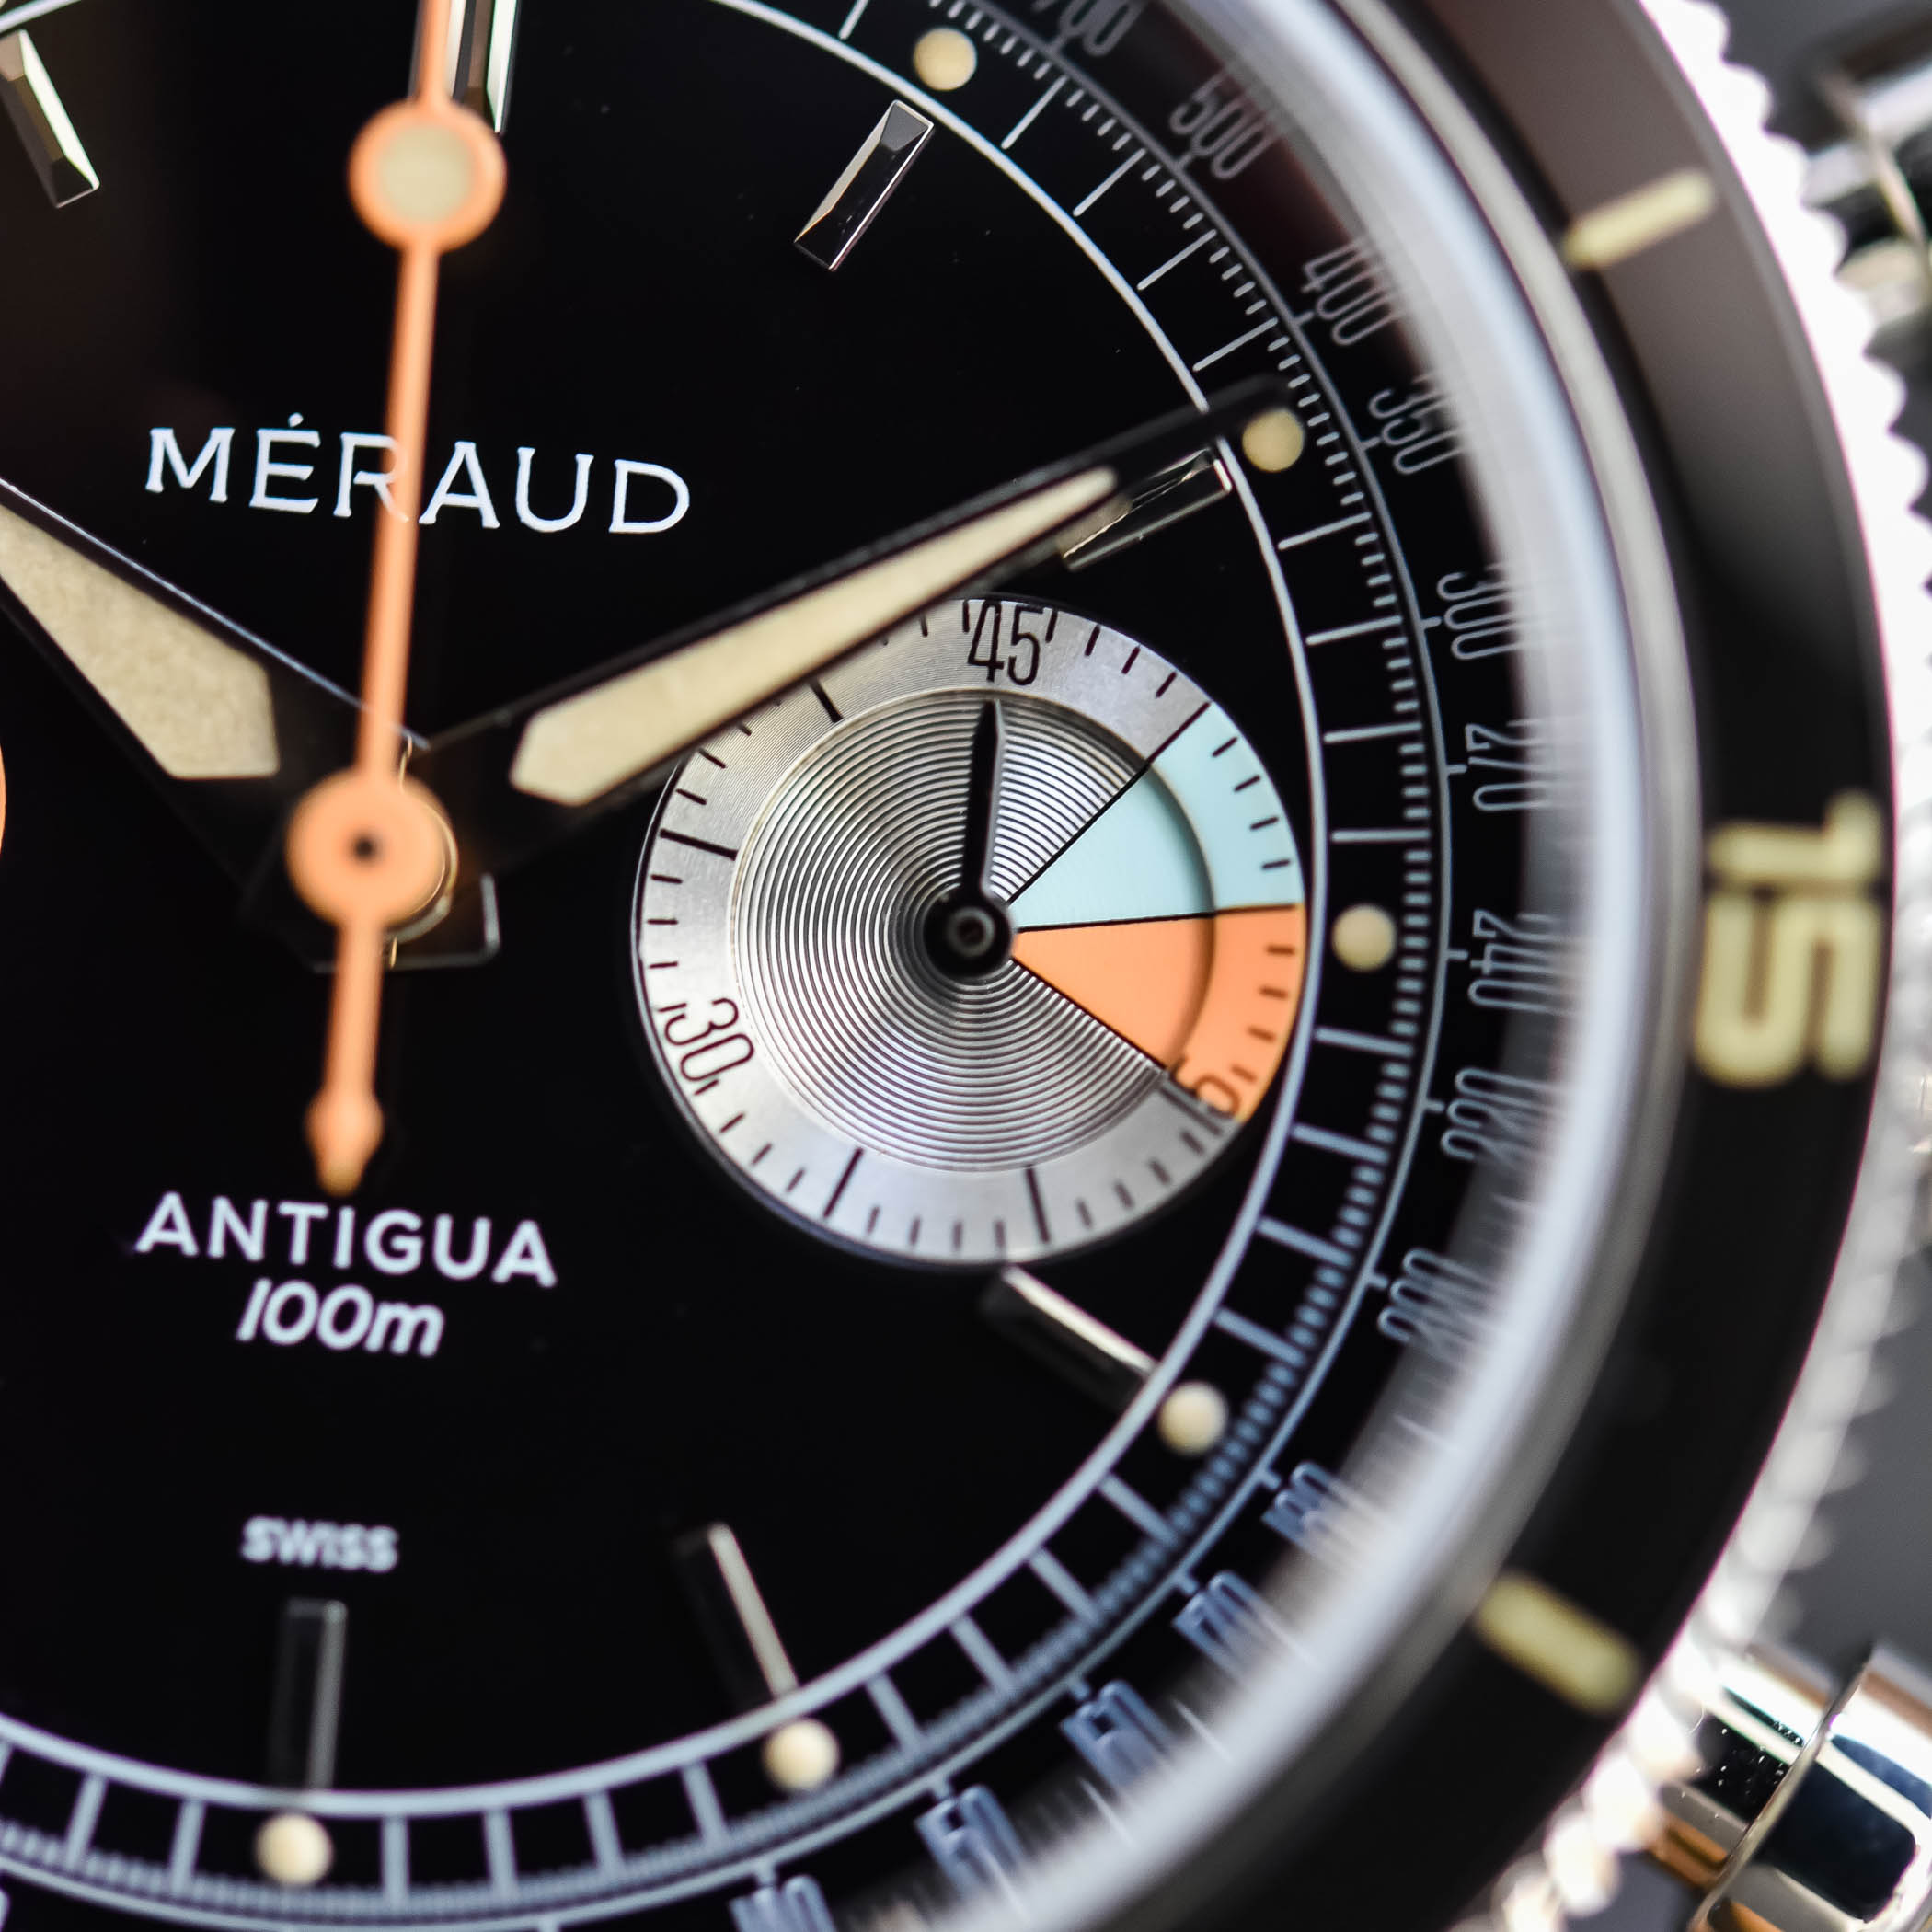 Meraud Antigua Chronograph with New Old Stock Landeron 248 Movement Restored - hands-on review - 13